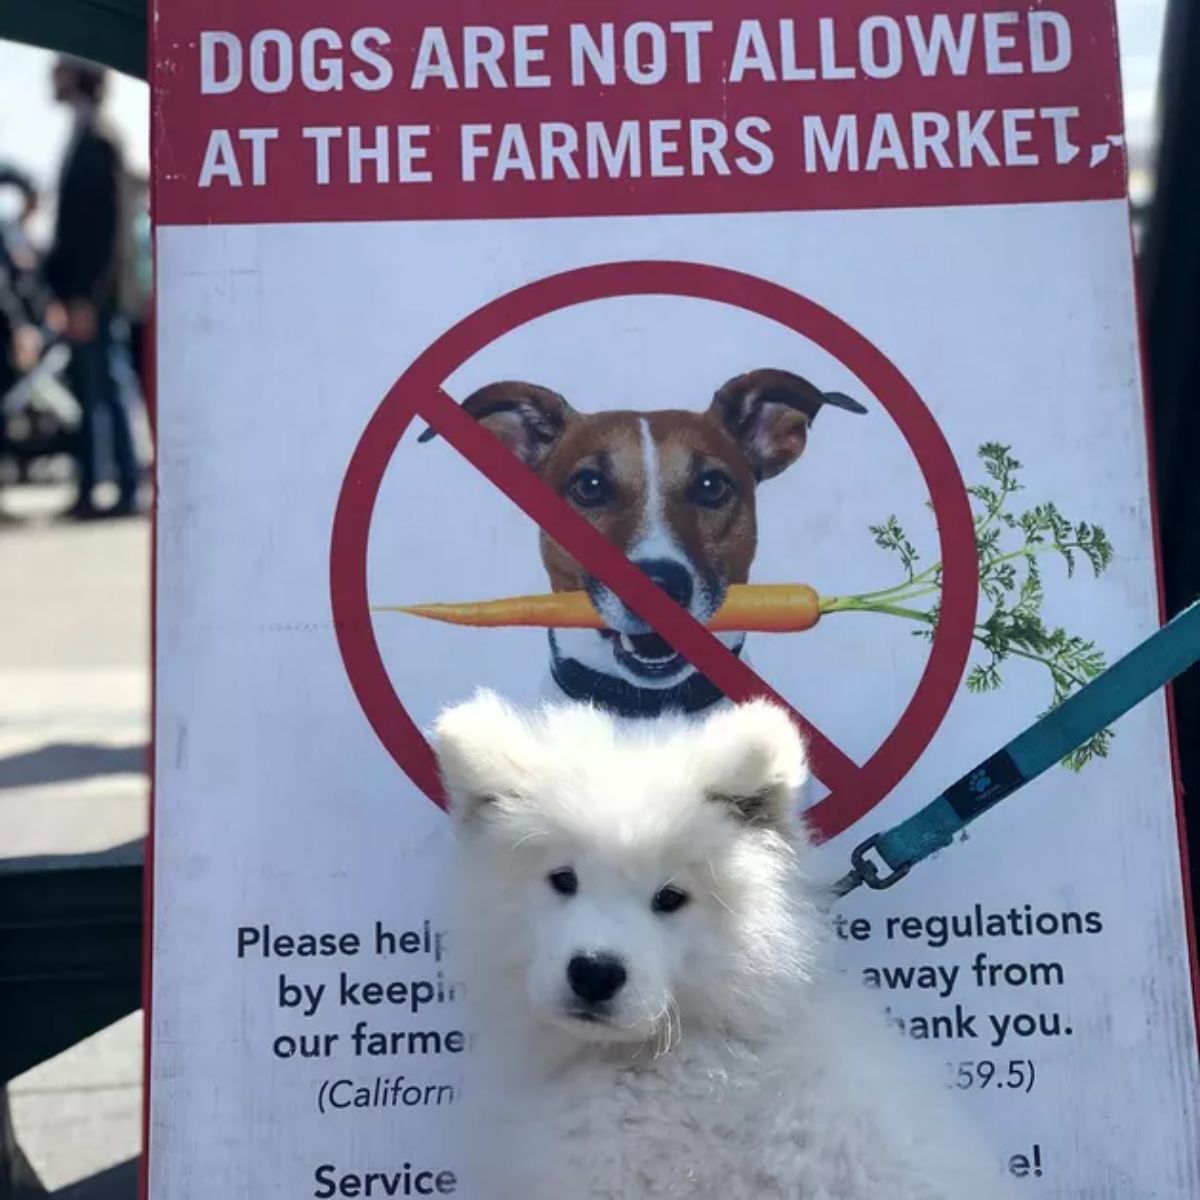 fluffy white samoyed puppy sitting by a sign saying DOGS ARE NOT ALLOWED AT THE FARMERS MARKET